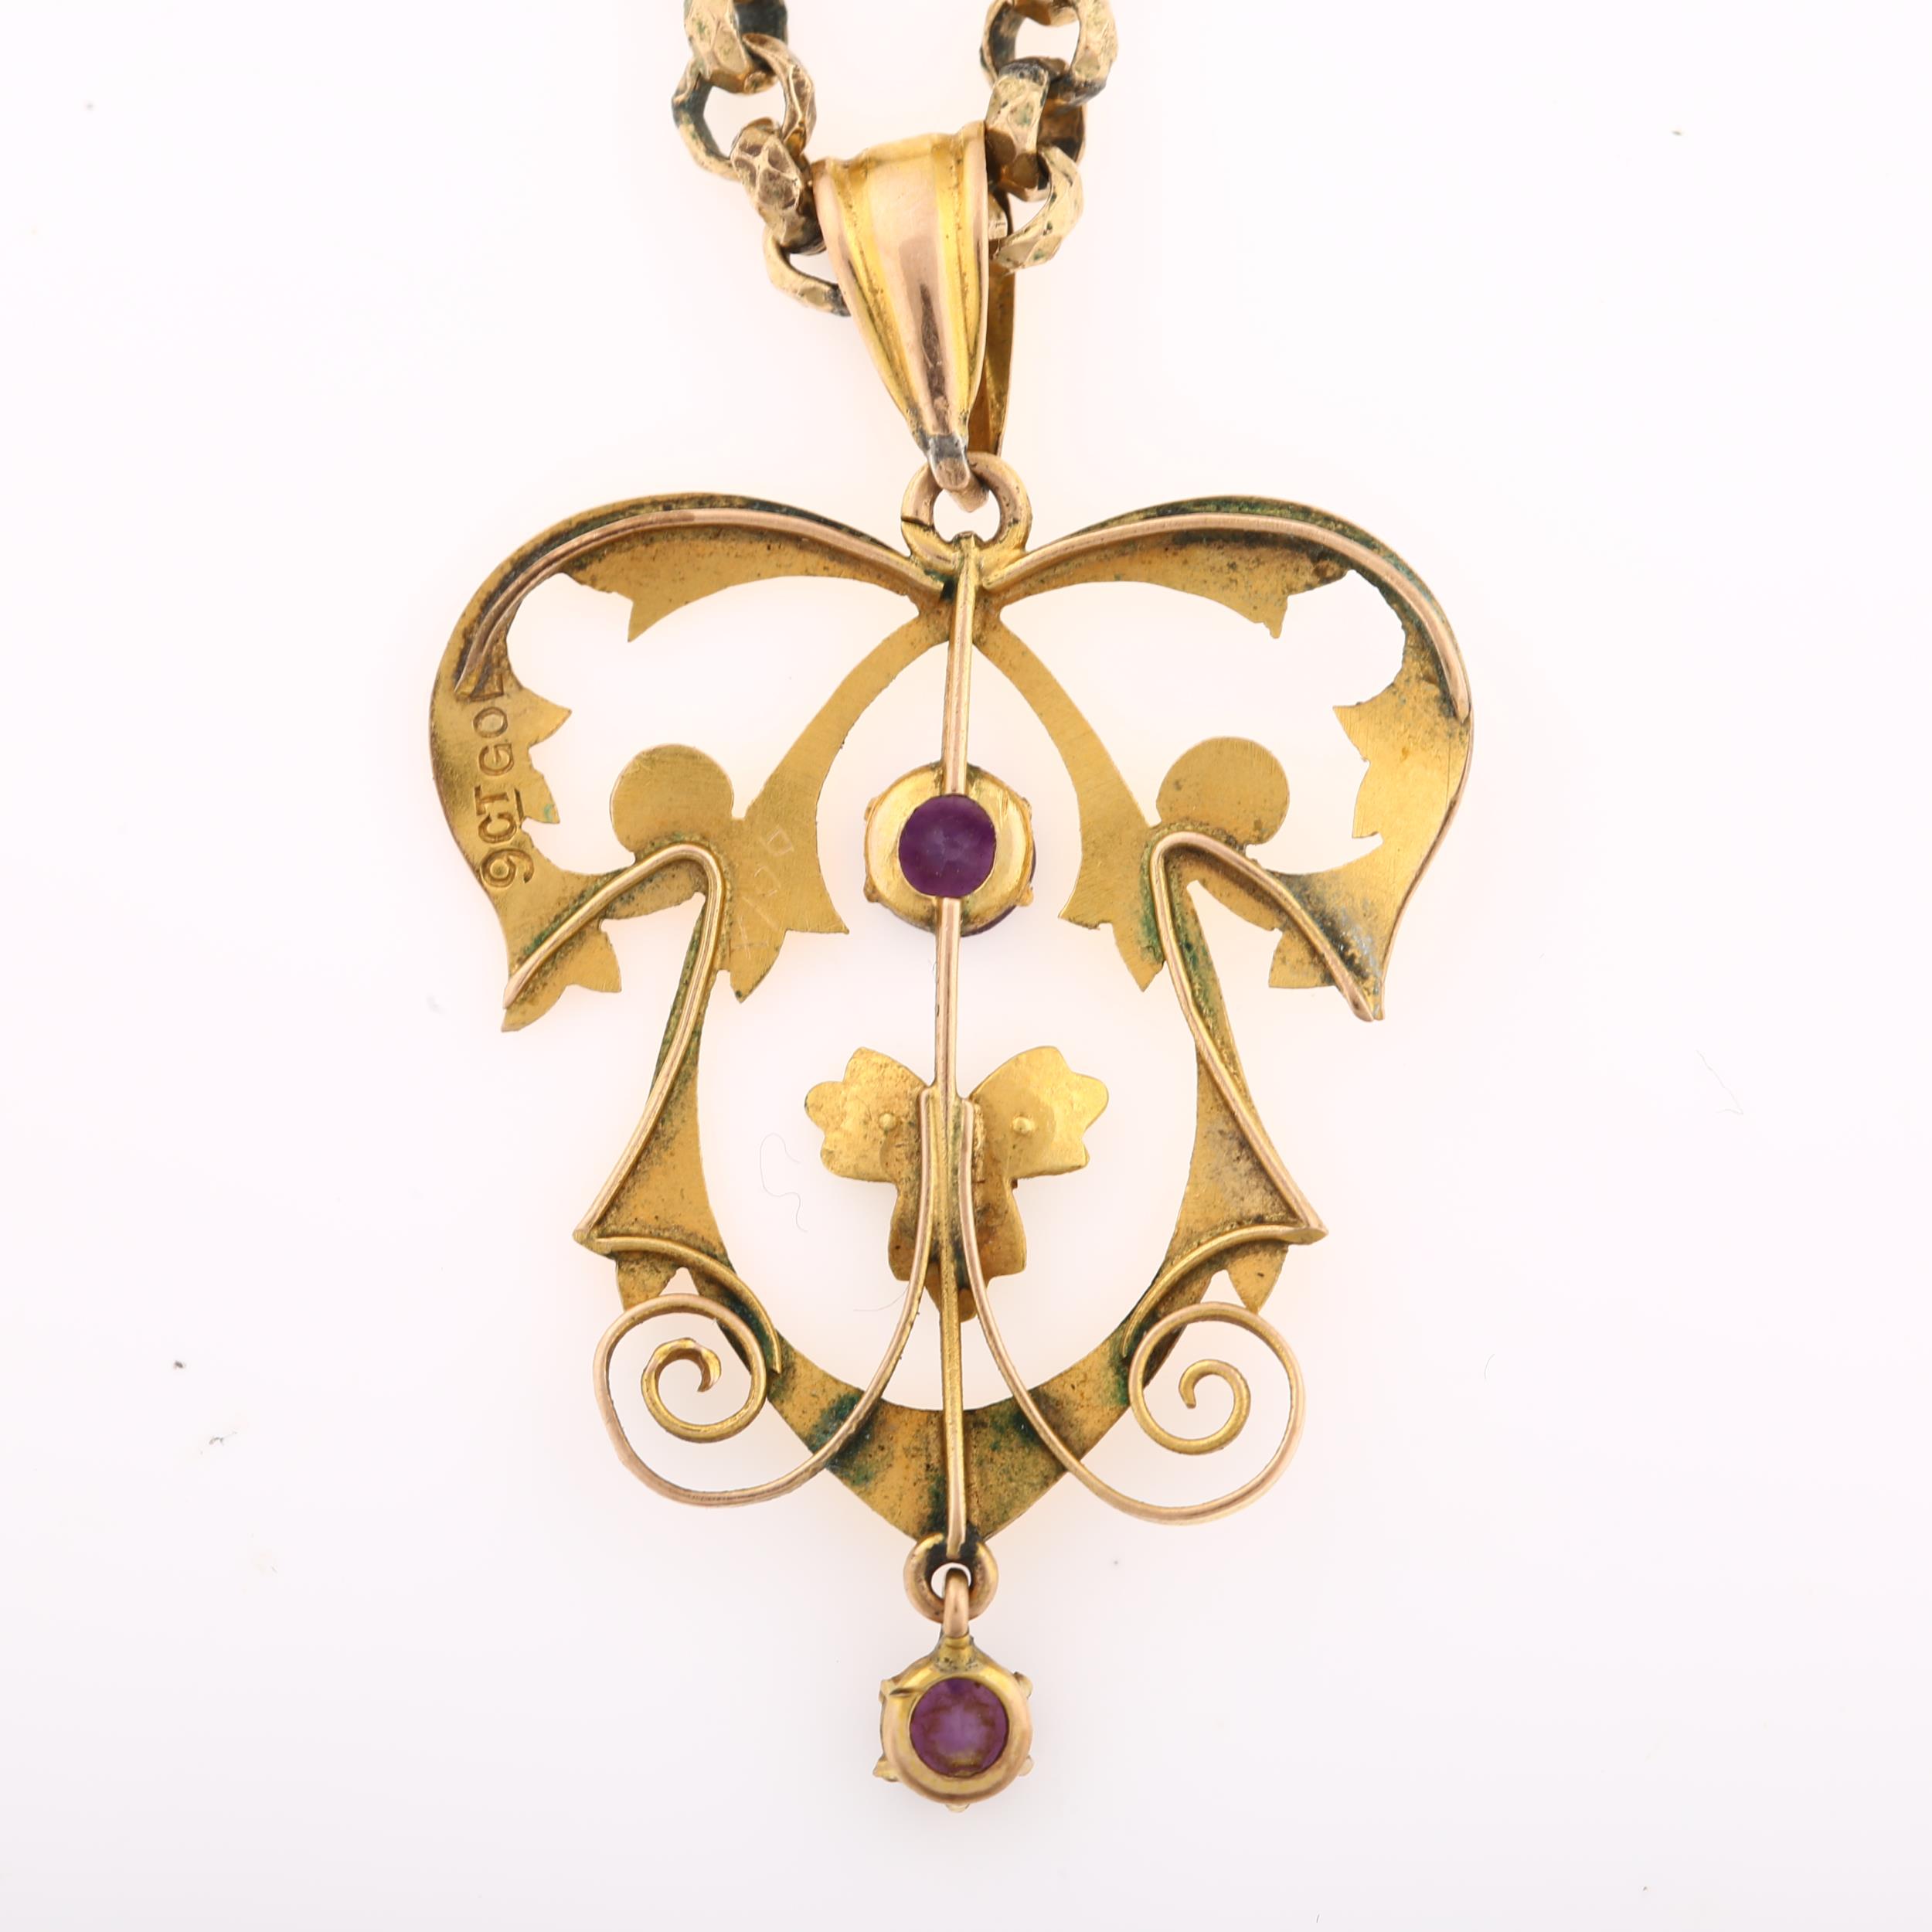 An Edwardian Art Nouveau 9ct gold amethyst and pearl openwork pendant necklace, on gold plated - Image 3 of 4